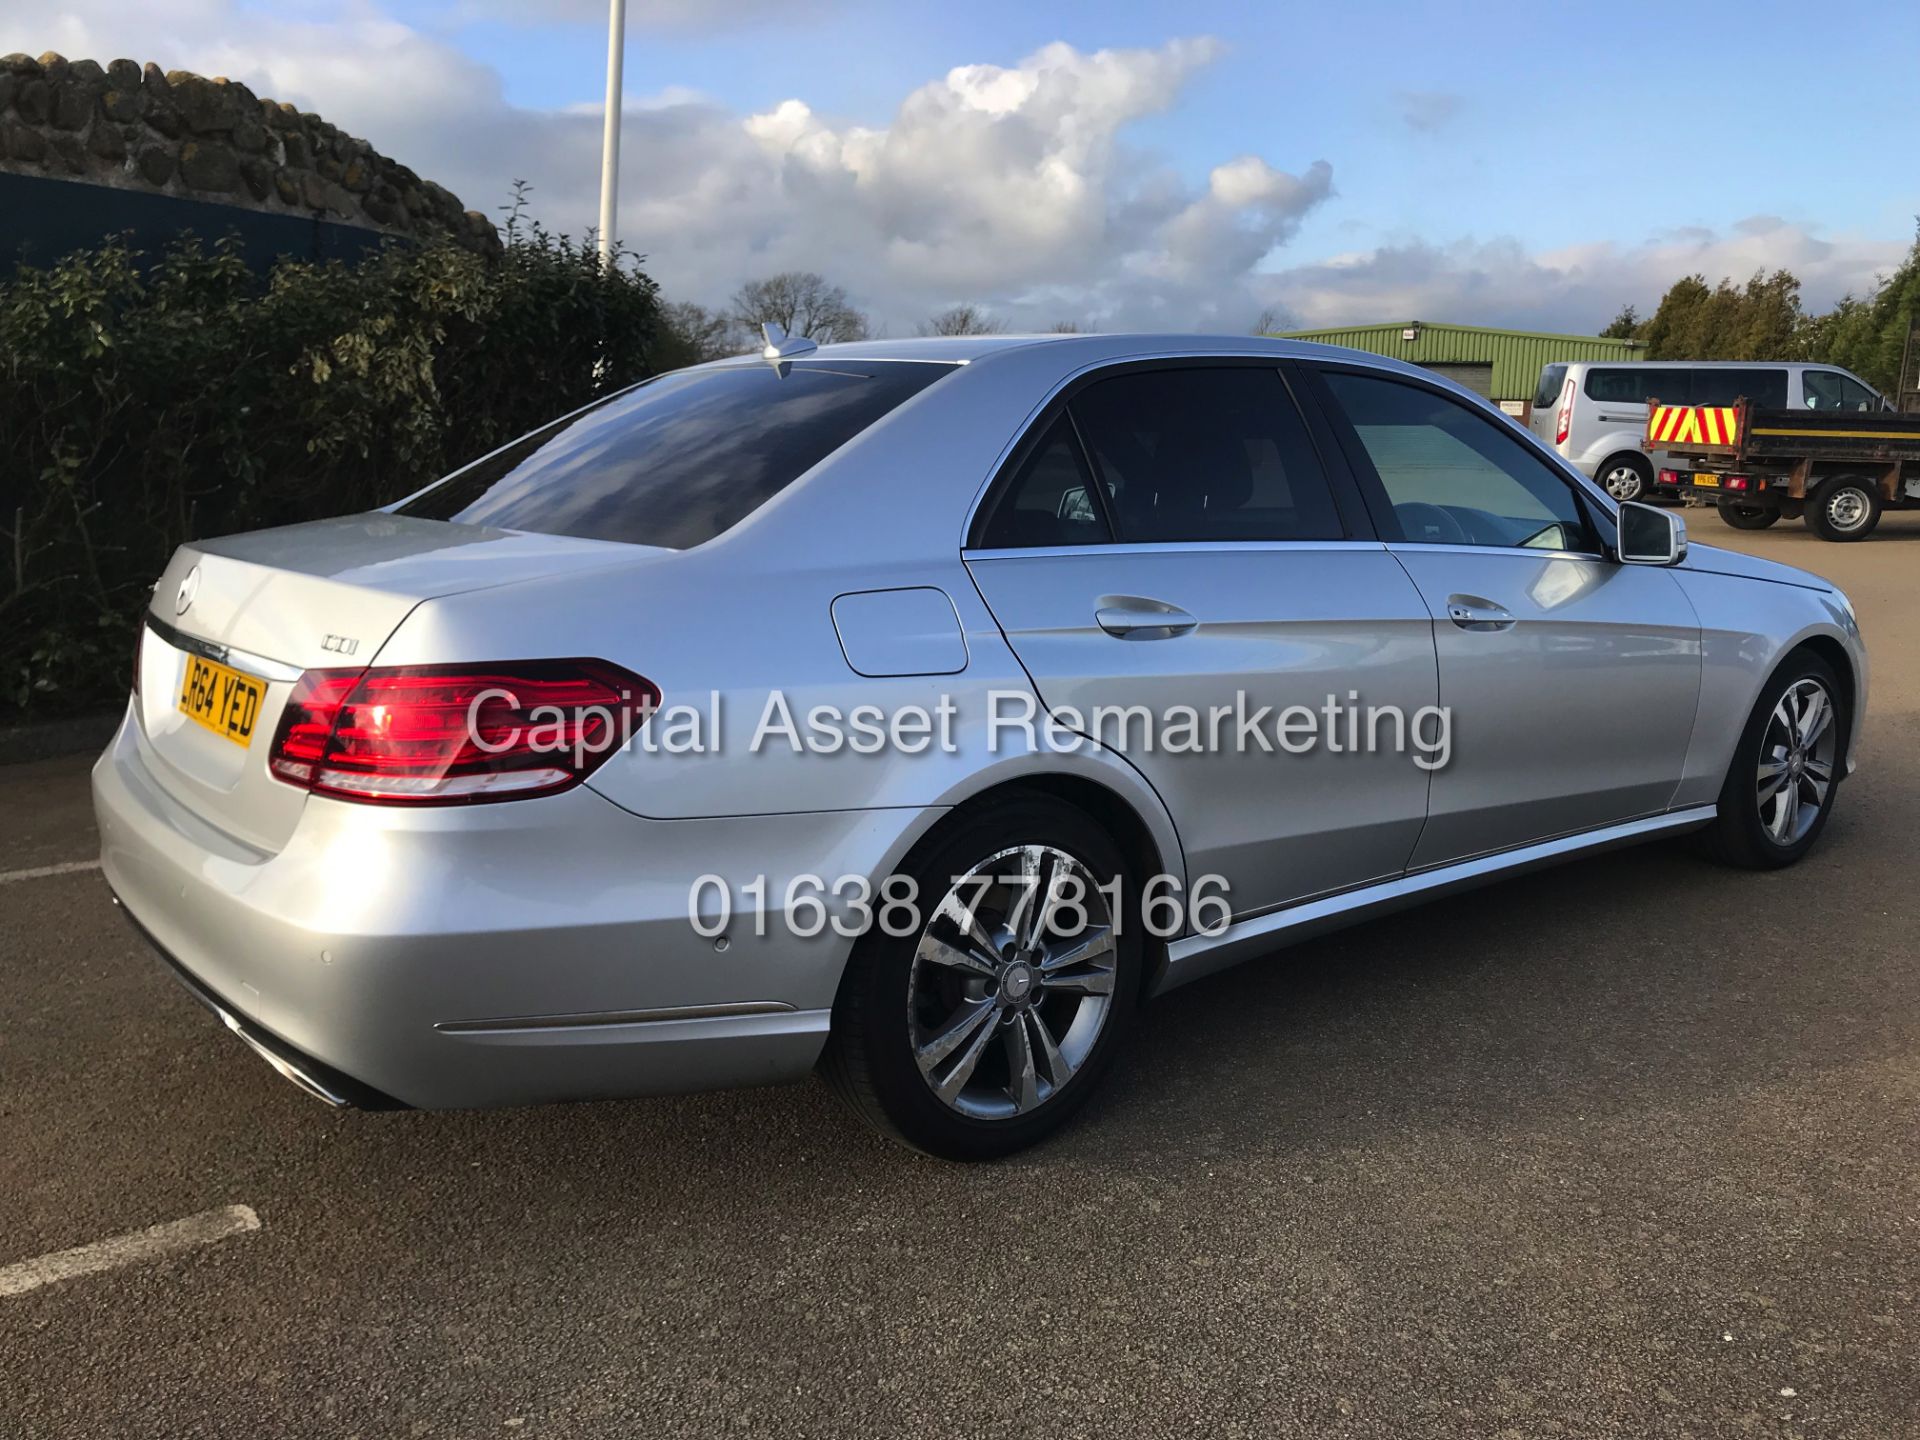 MERCEDES E220d "SPECIAL EQUIPMENT" 7G TRONIC AUTO (2015 MODEL) 1 OWNER - SAT NAV - LEATHER - Image 11 of 26